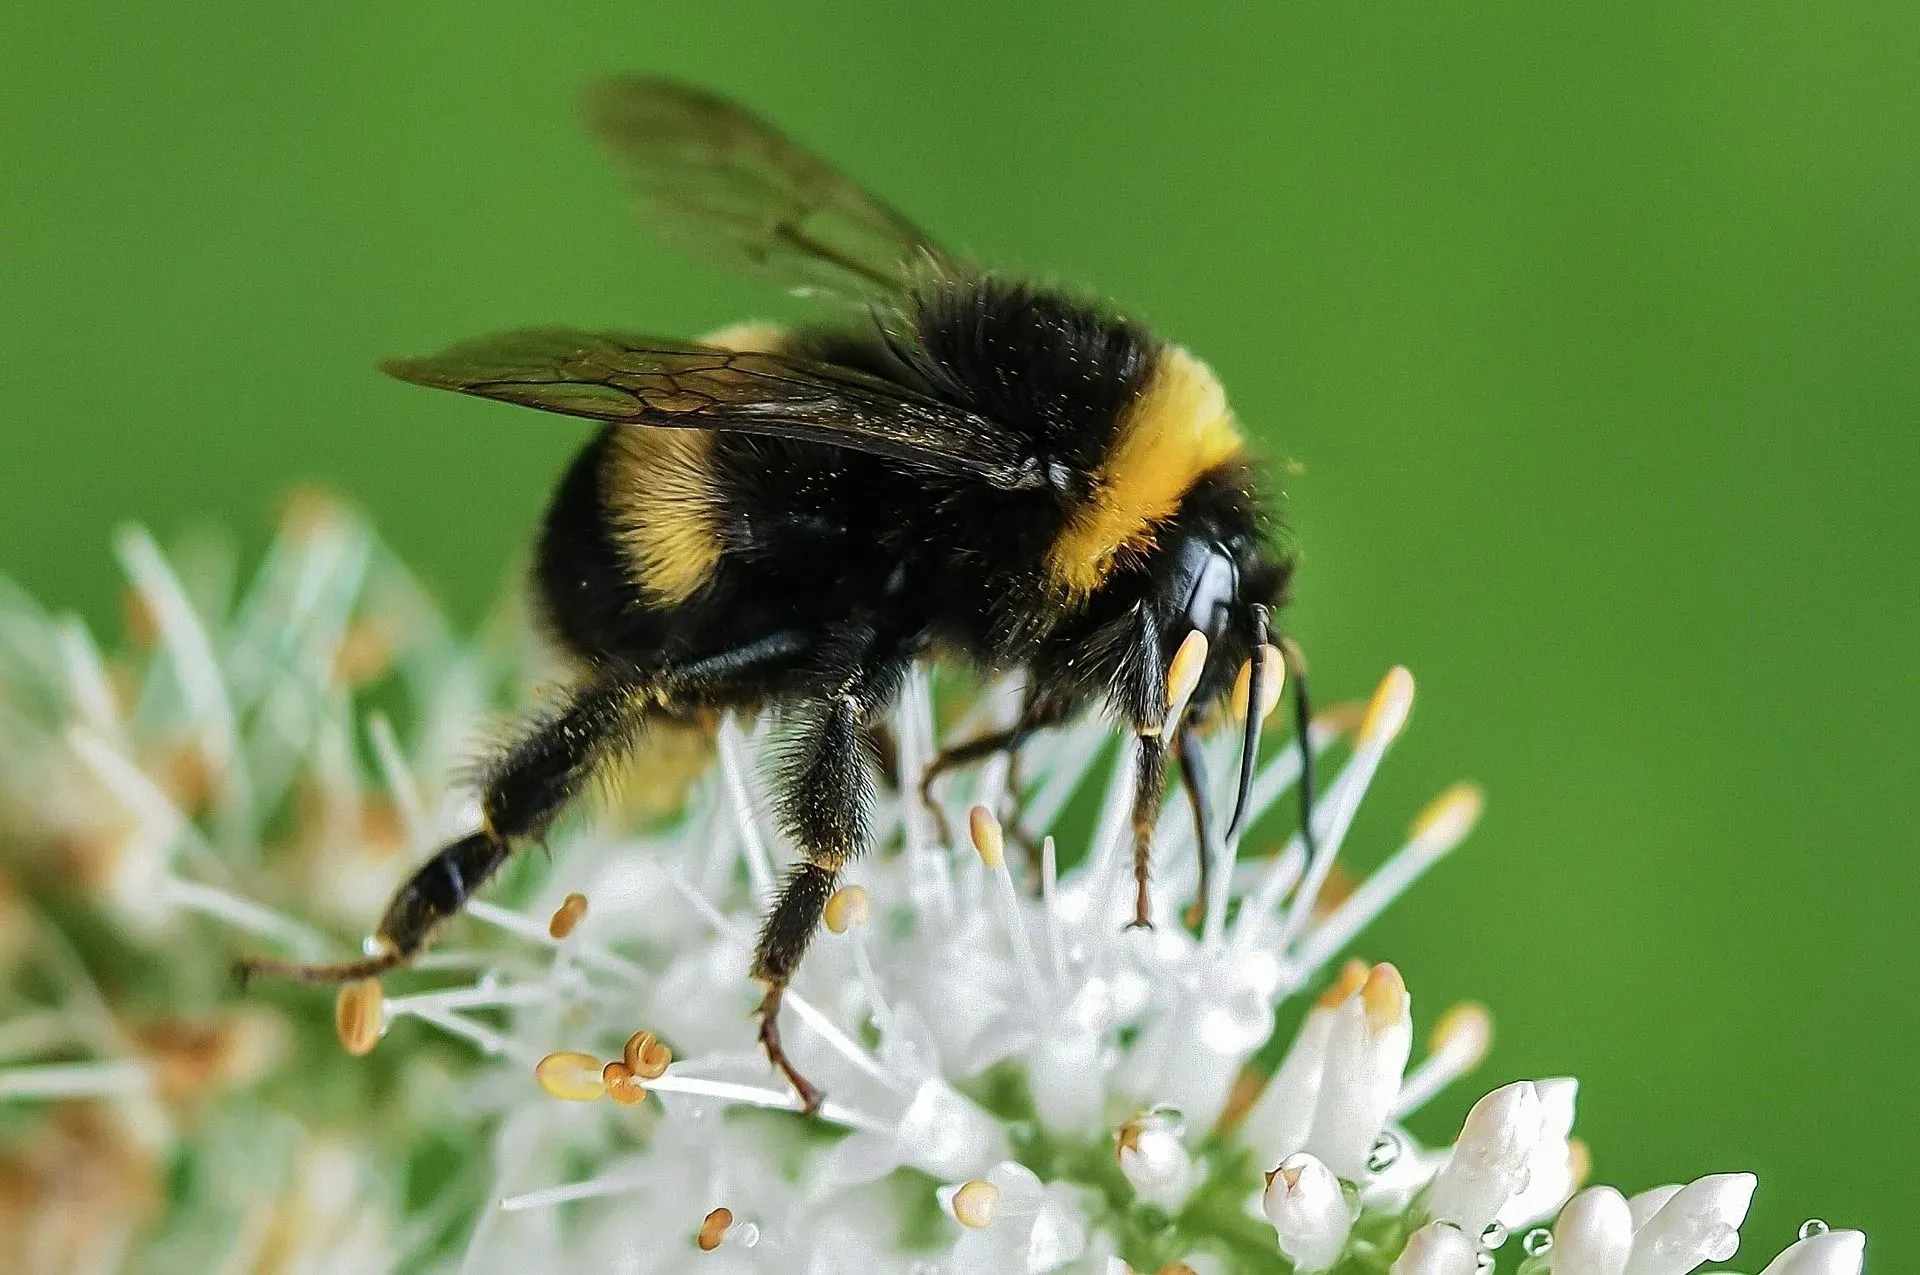 For any garden enthusiast, the question of bumble bee vs carpenter bee might be one that is often pondered.